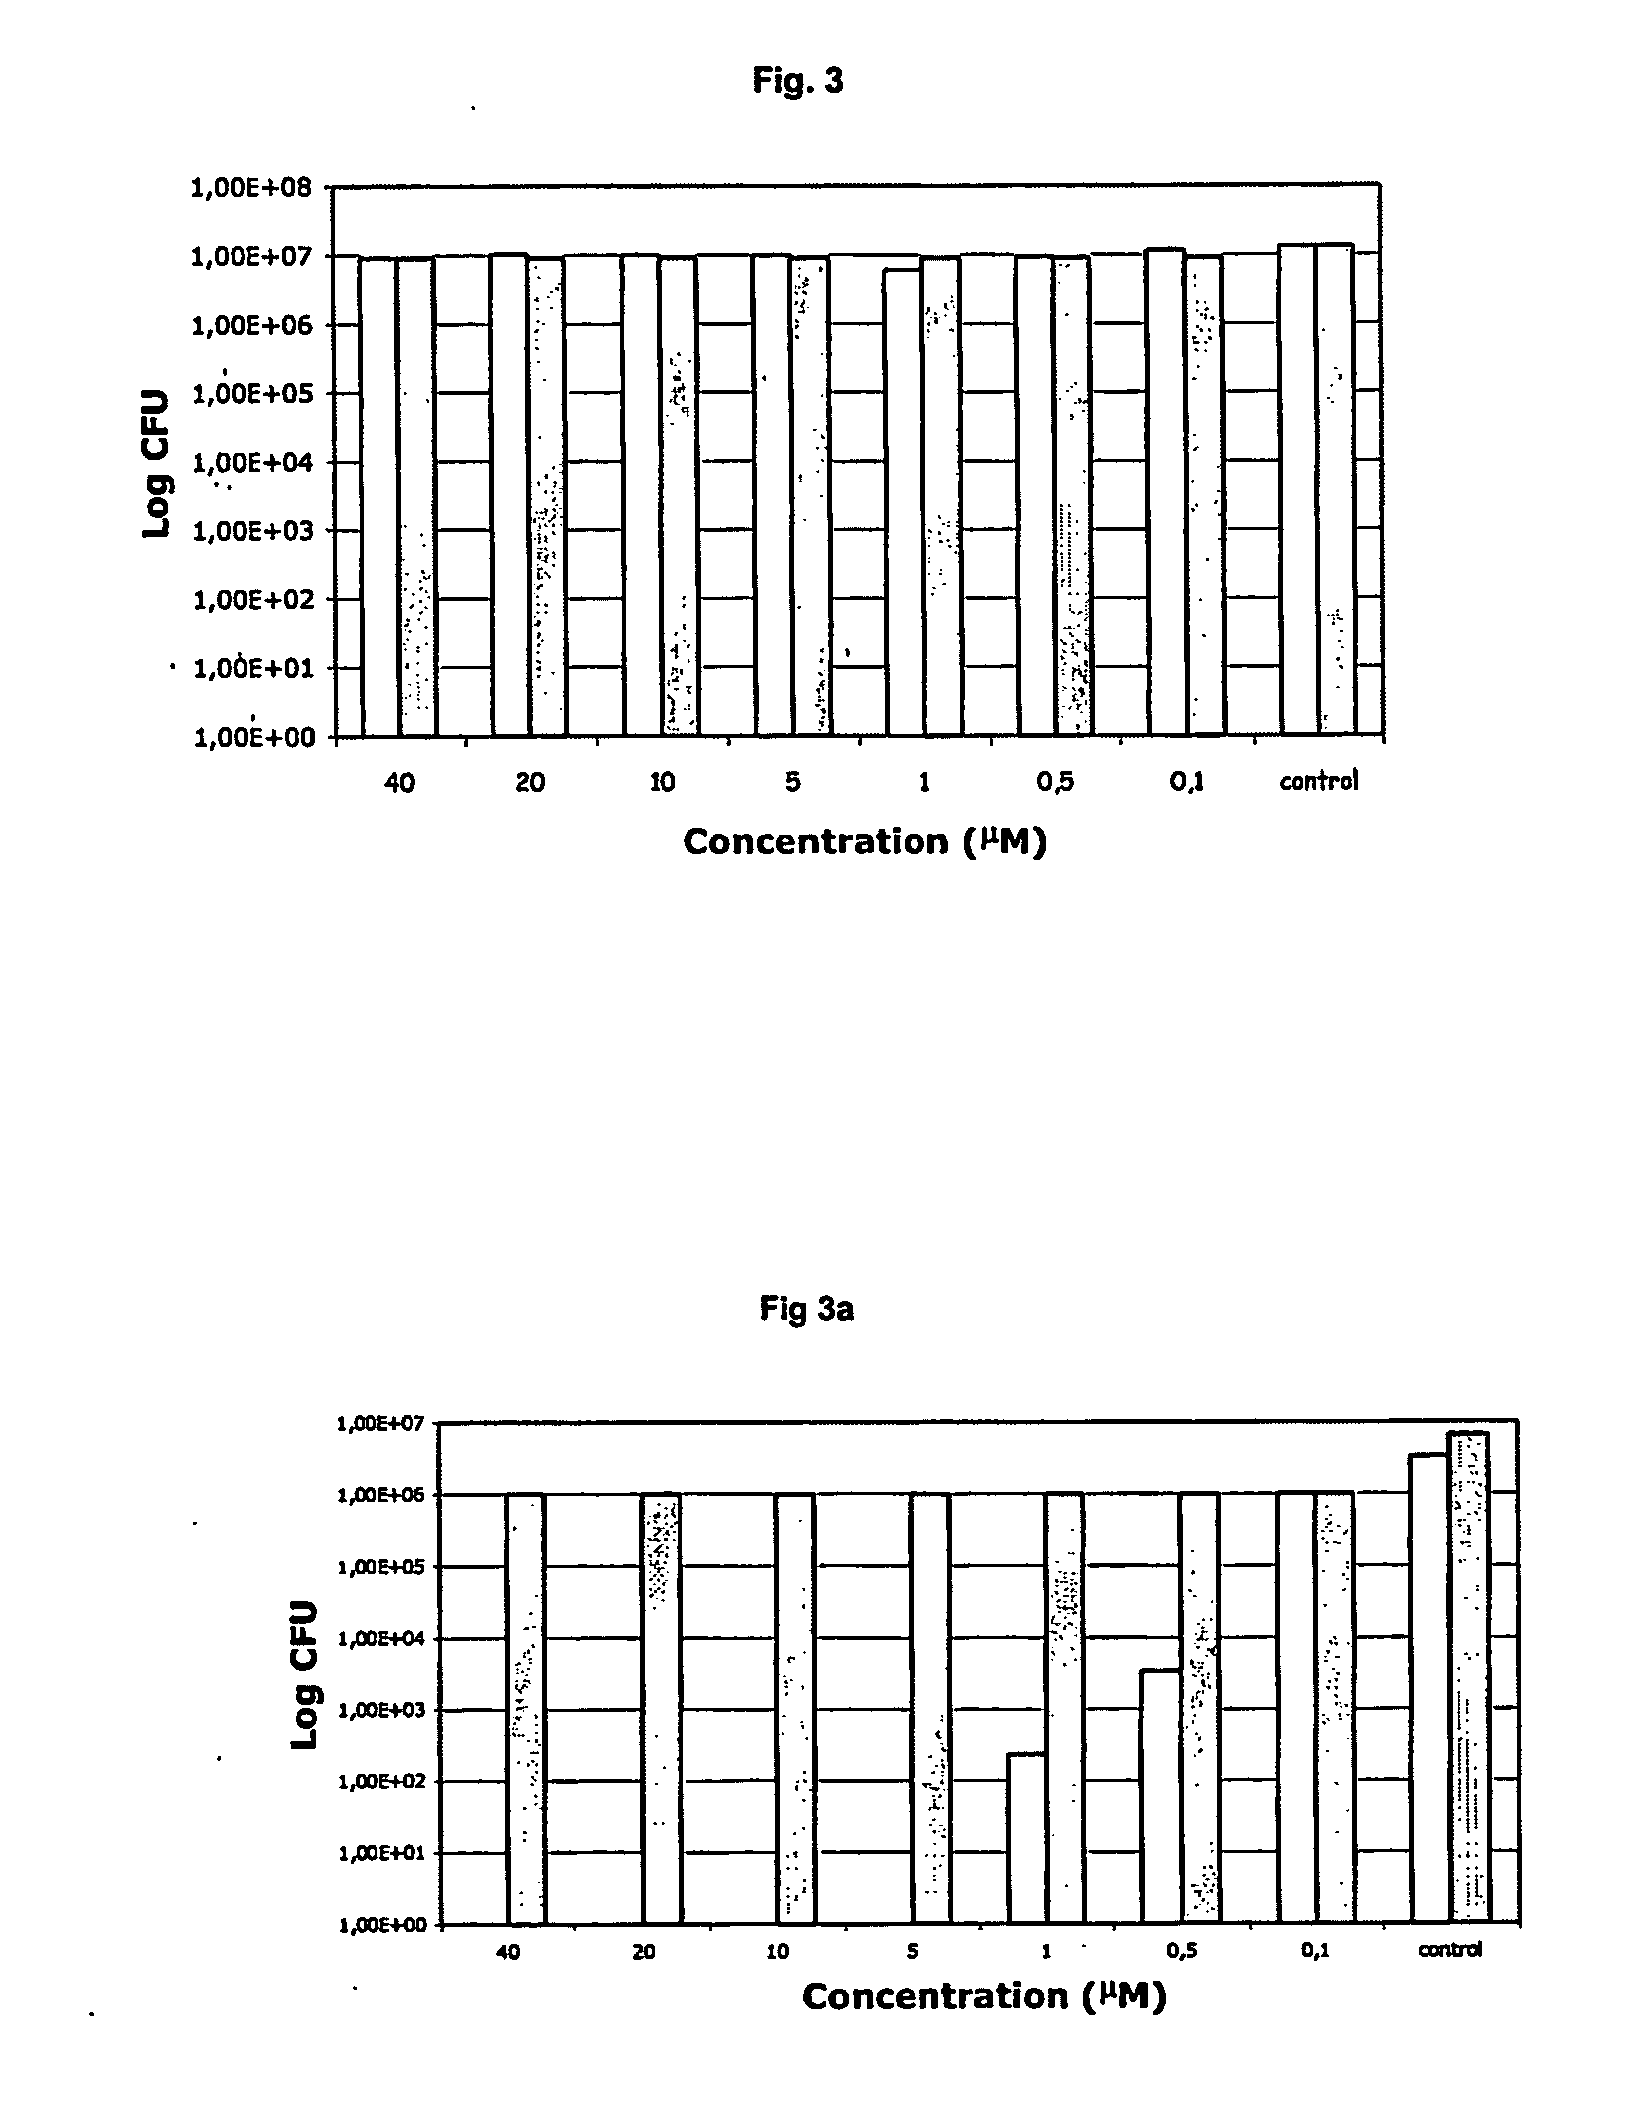 Antibacterial compositions comprising metal phthalocyanine analogues